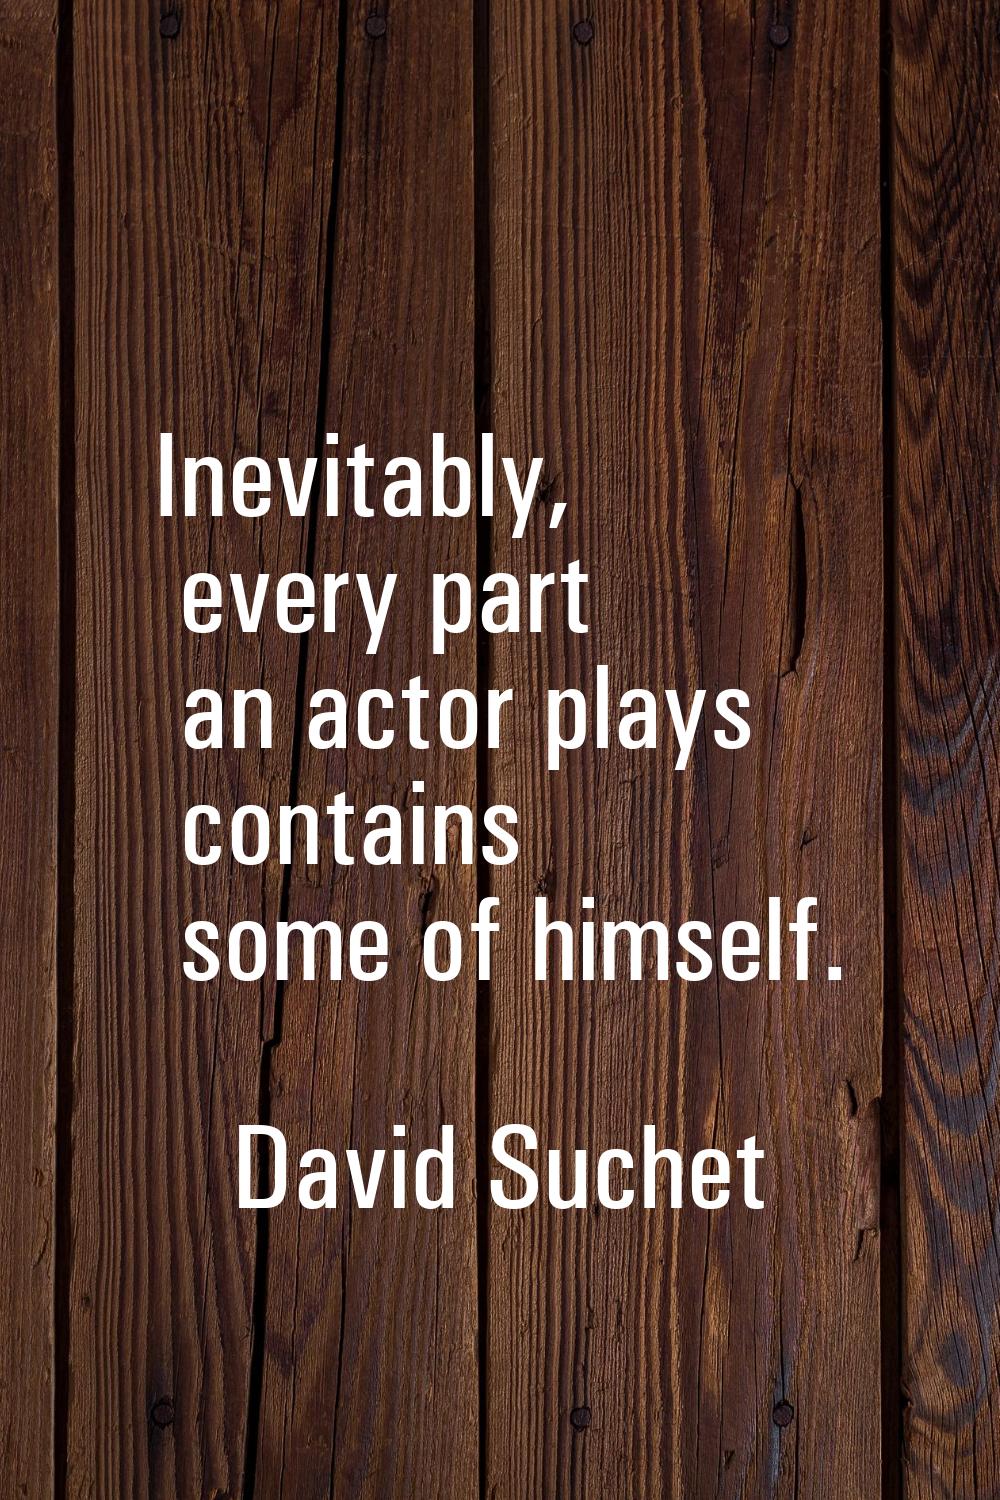 Inevitably, every part an actor plays contains some of himself.